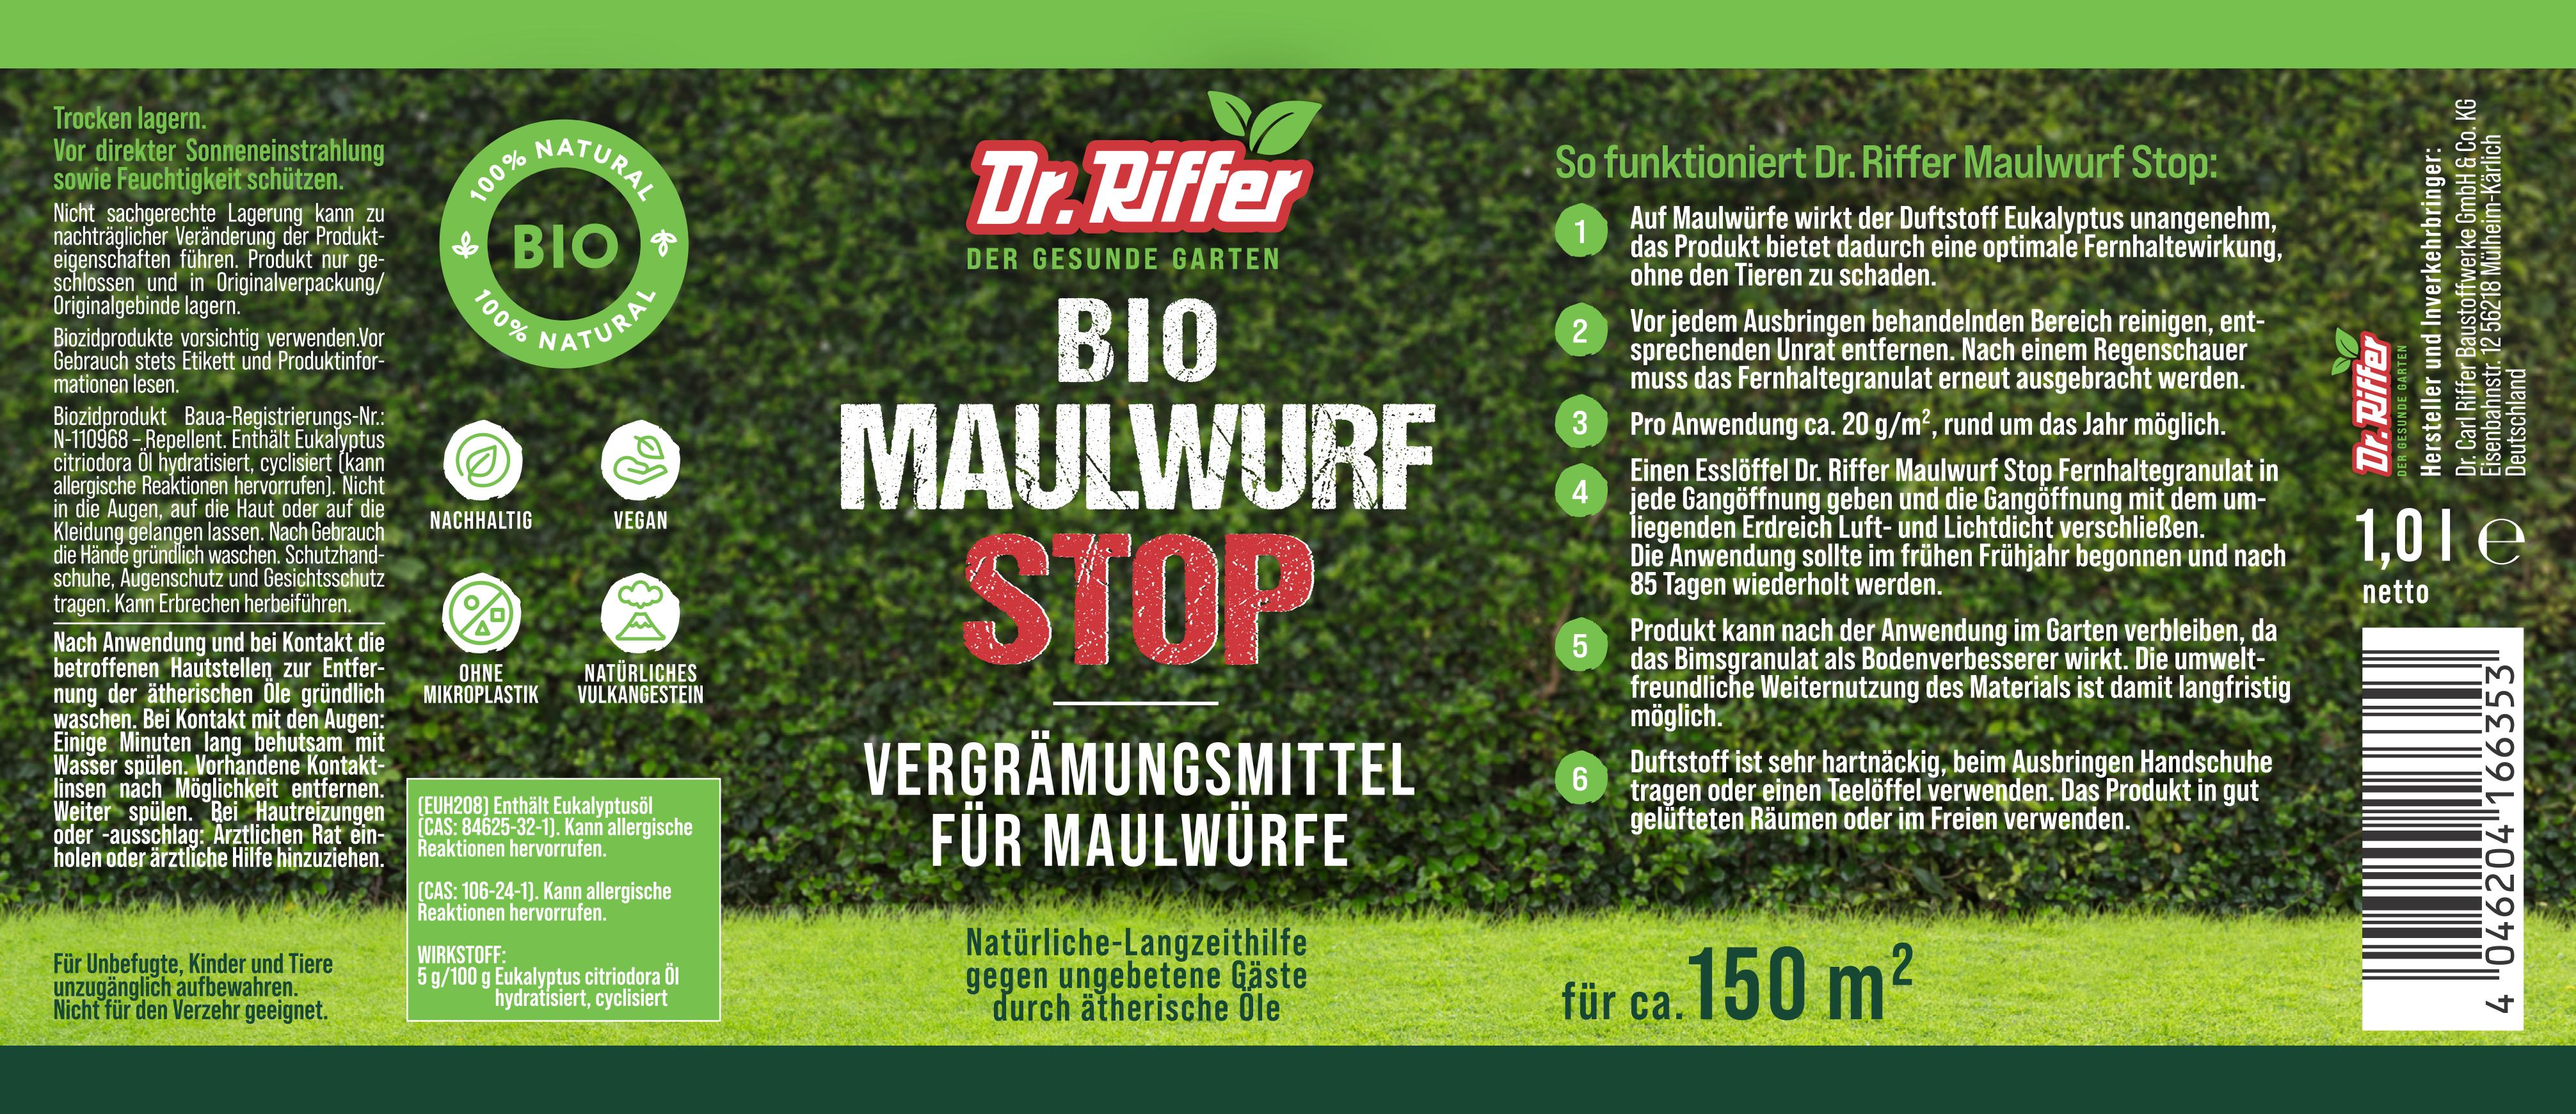 Dr. Riffer Maulwurf Stop